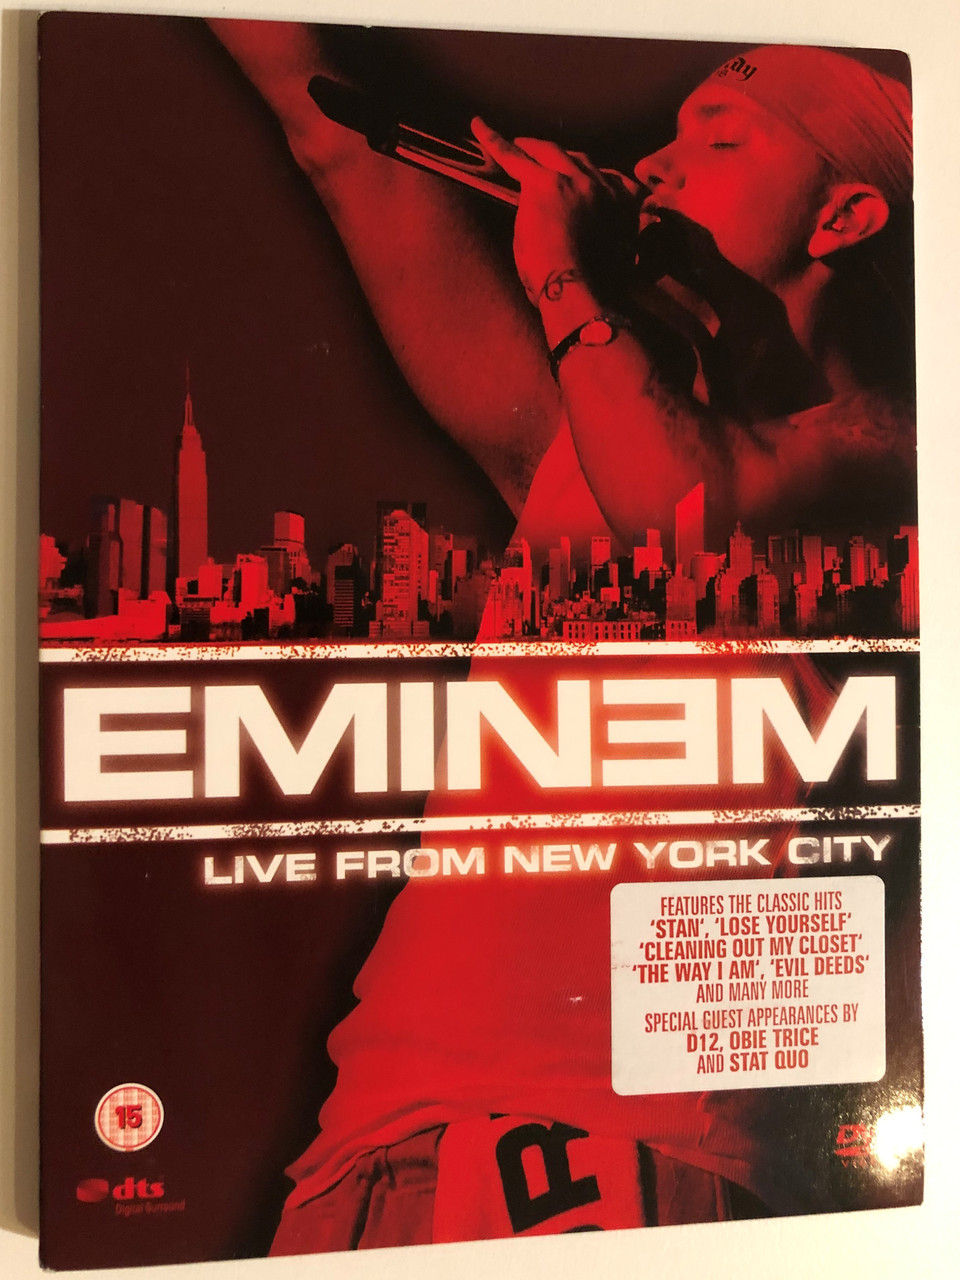 https://cdn10.bigcommerce.com/s-62bdpkt7pb/products/0/images/265917/Eminem_Live_From_New_York_City_Features_The_Classic_Hits_Stan_Lose_Yourself_Cleaning_Out_My_Closet_The_Way_I_Am_Evil_Deeds_And_Many_More_Special_Guest_Appearances_By_D_1__78551.1675933022.1280.1280.JPG?c=2&_gl=1*vyhlkx*_ga*MjA2NTIxMjE2MC4xNTkwNTEyNTMy*_ga_WS2VZYPC6G*MTY3NTkzMjY2Ny43NTQuMC4xNjc1OTMyNjY3LjYwLjAuMA..